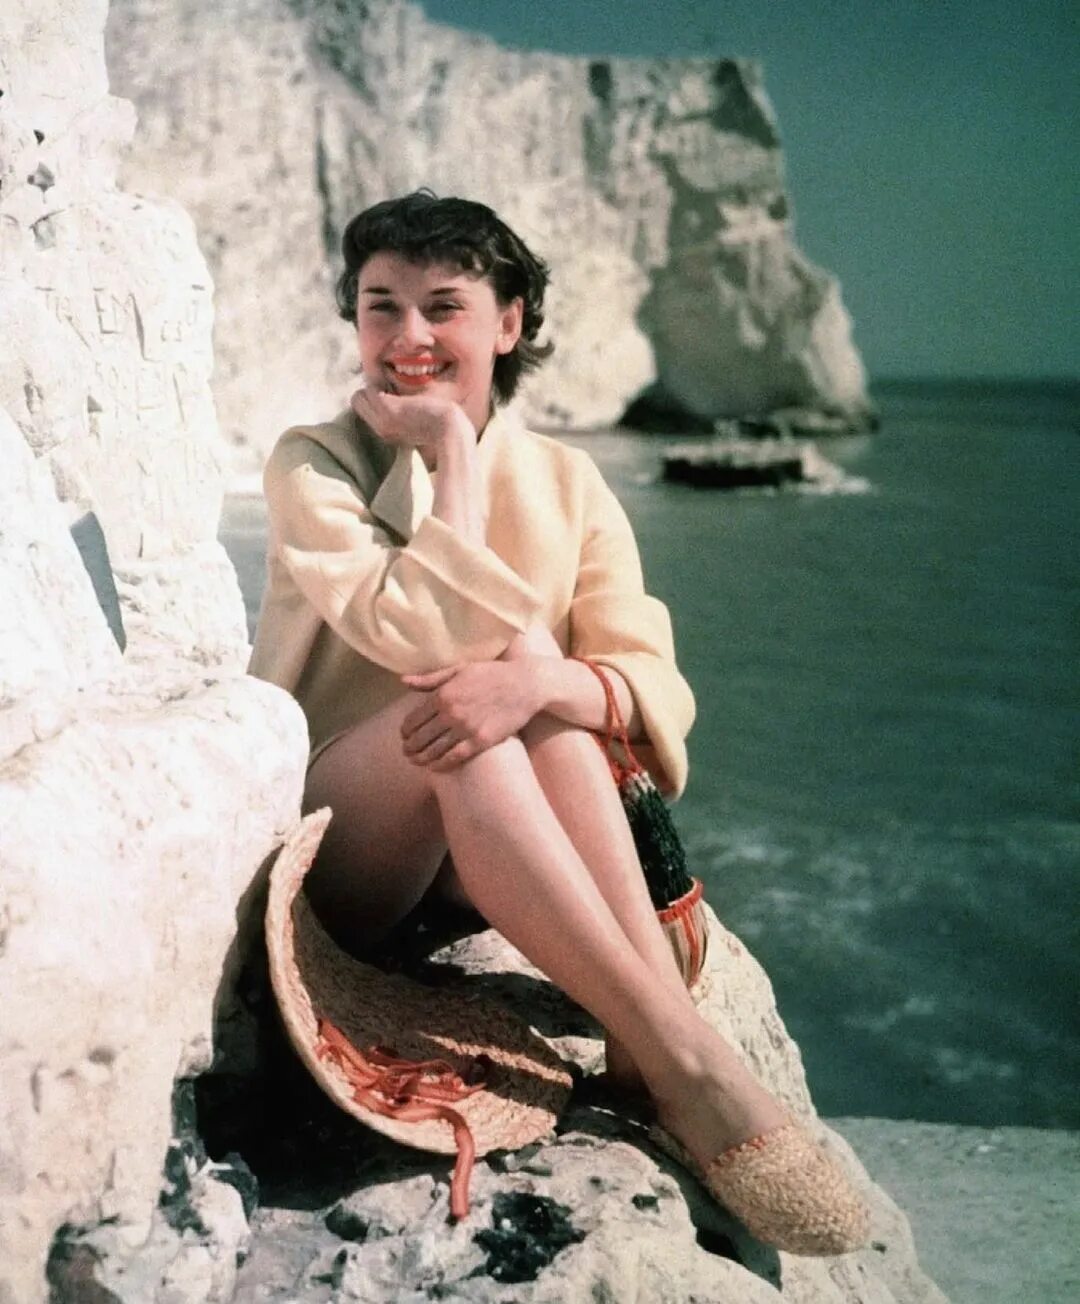 For Audrey в Instagram: "Happy 1st July! ☀ Here’s a young Audrey Hepbu...